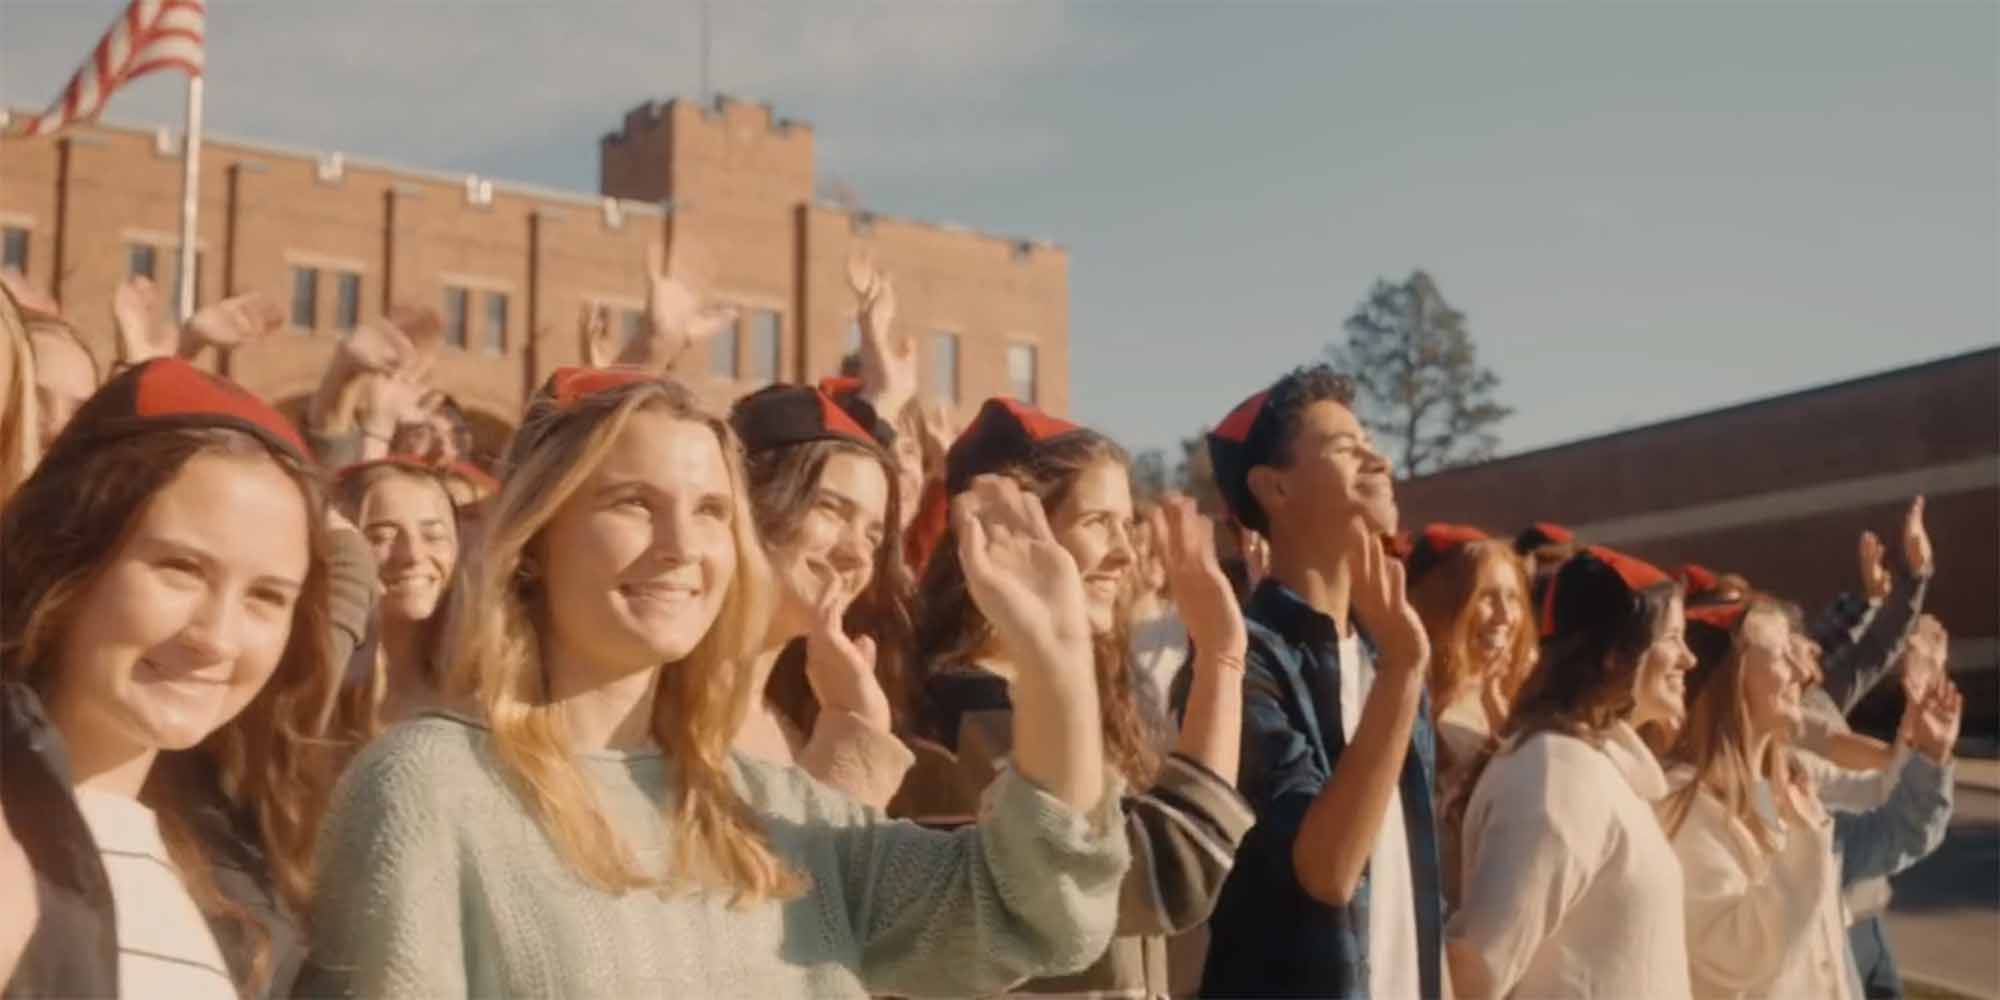 Students in beanies waving